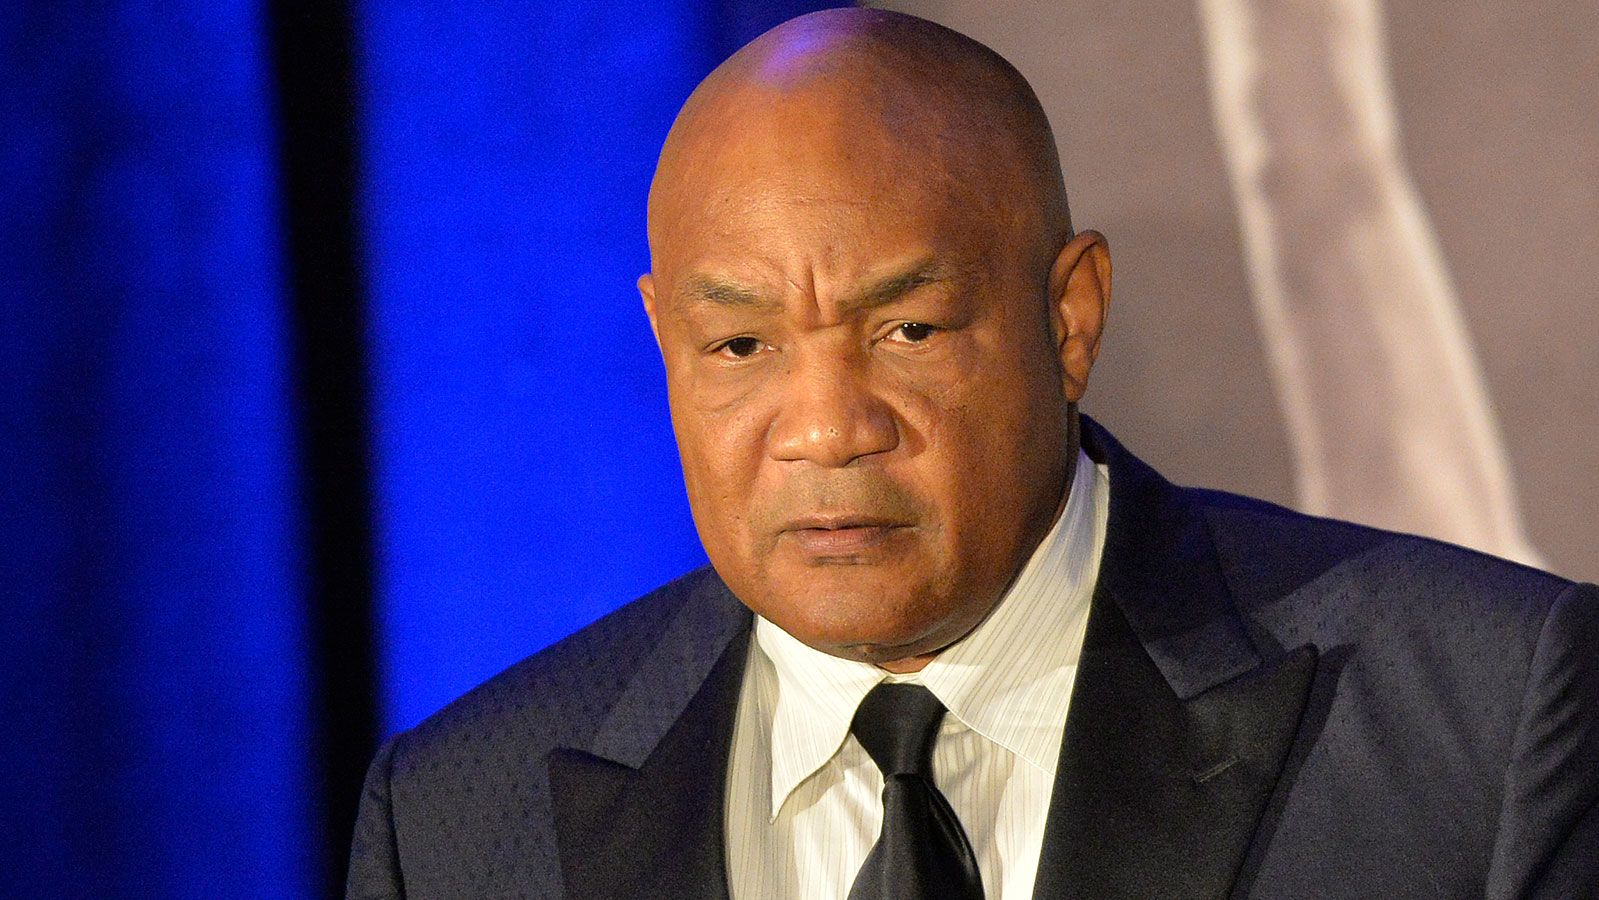 Former heavyweight boxing champion George Foreman at the Sports Illustrated Legacy Awards Thursday, Oct. 1, 2015.